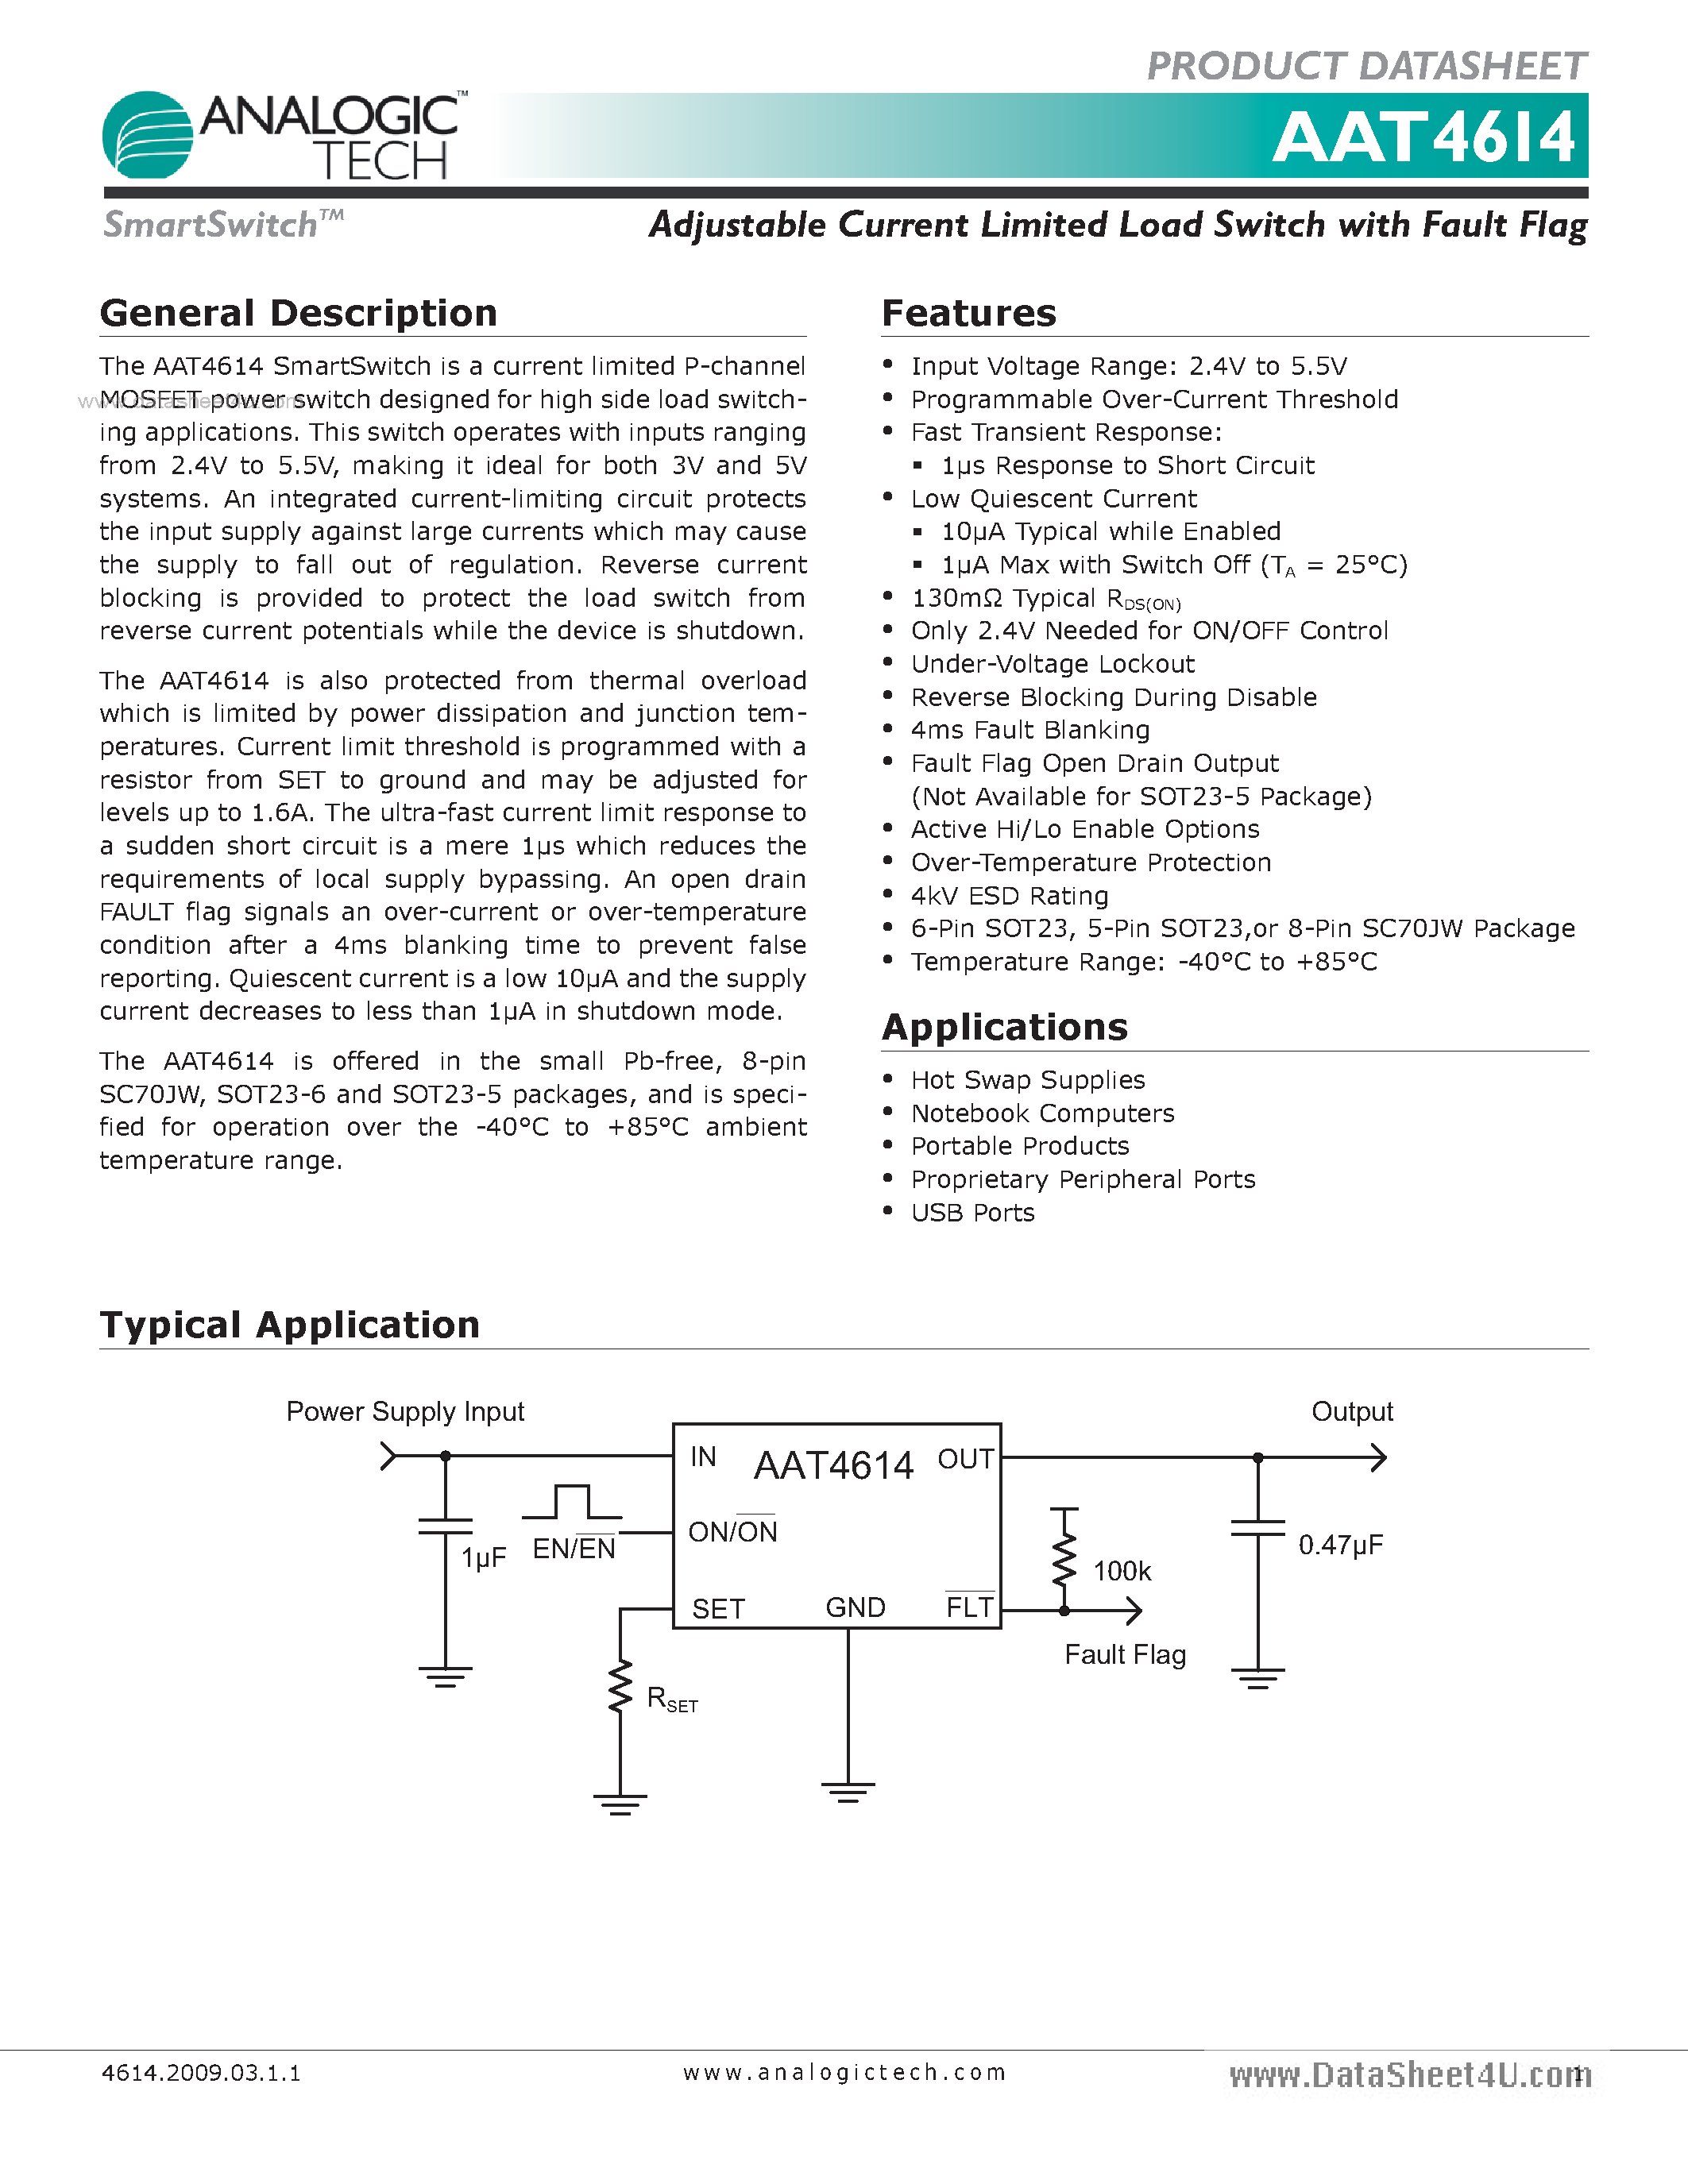 Datasheet AAT4614 - Adjustable Current Limited Load Switch page 1